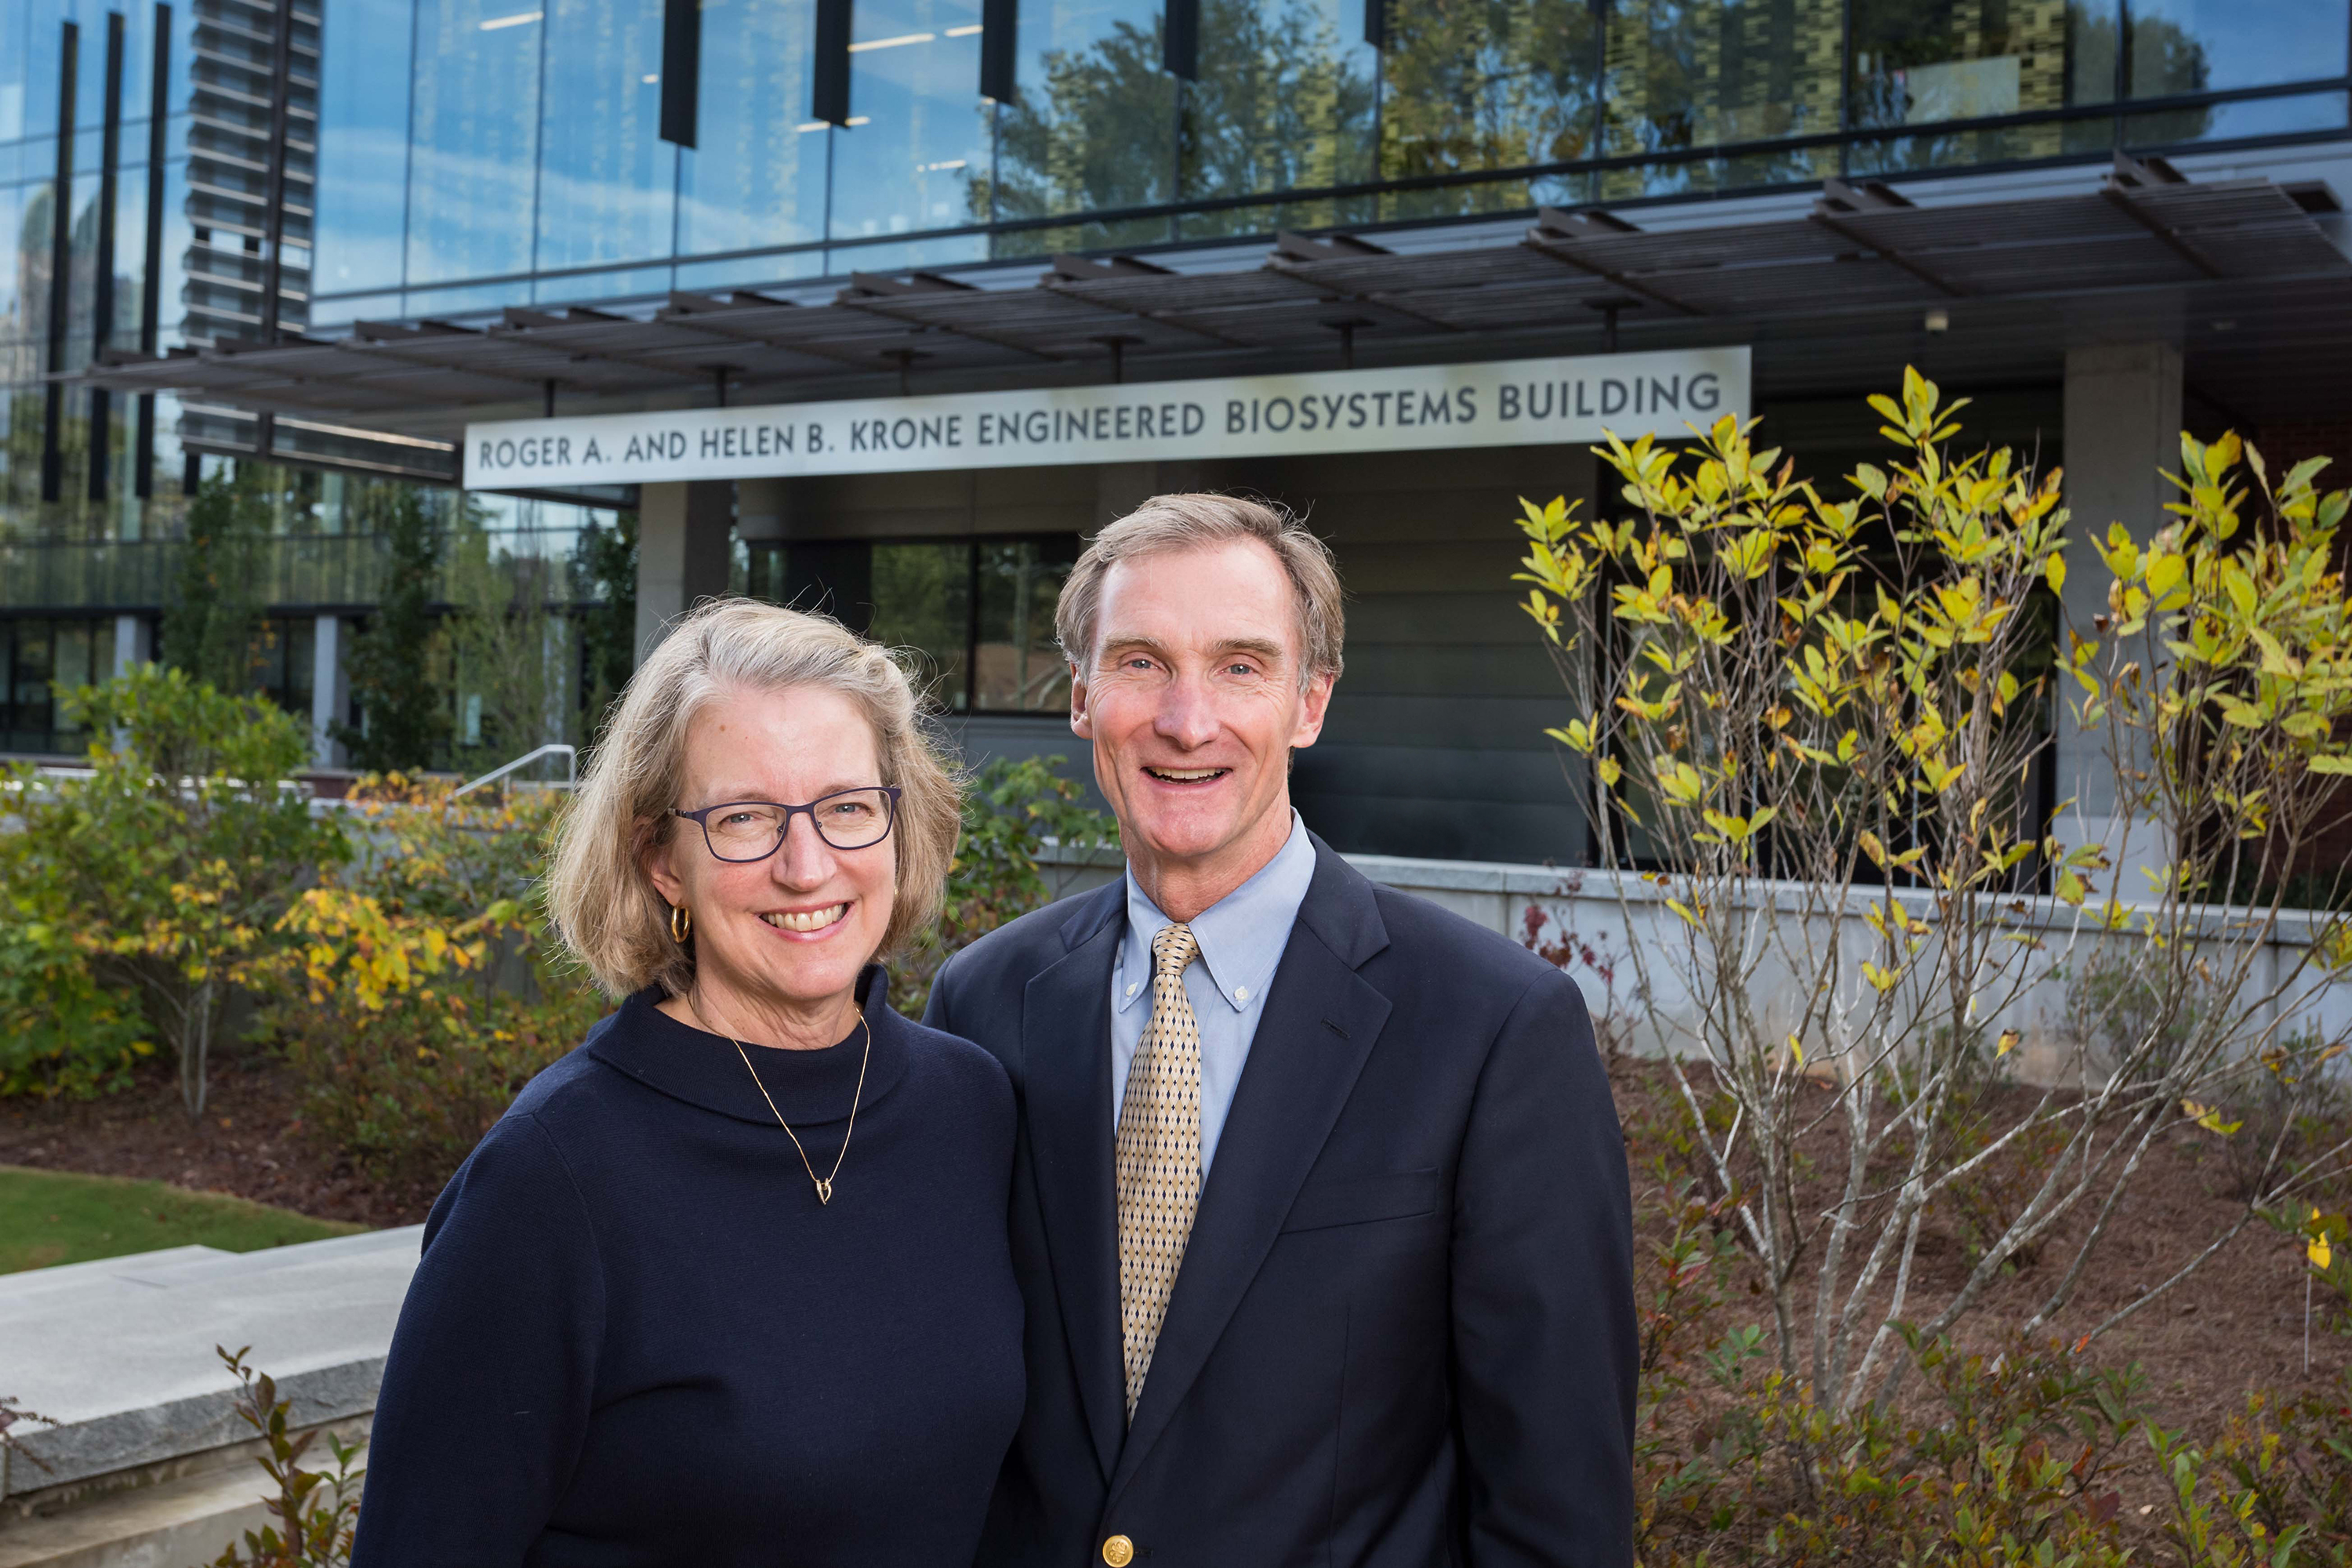 Helen and Roger Krone contributed the lead gift for the engineered biosystems building at the Georgia Institute of Technology in Atlanta. The Roger A. and Helen B. Krone Engineered Biosystems Building was officially named October 20, 2017.